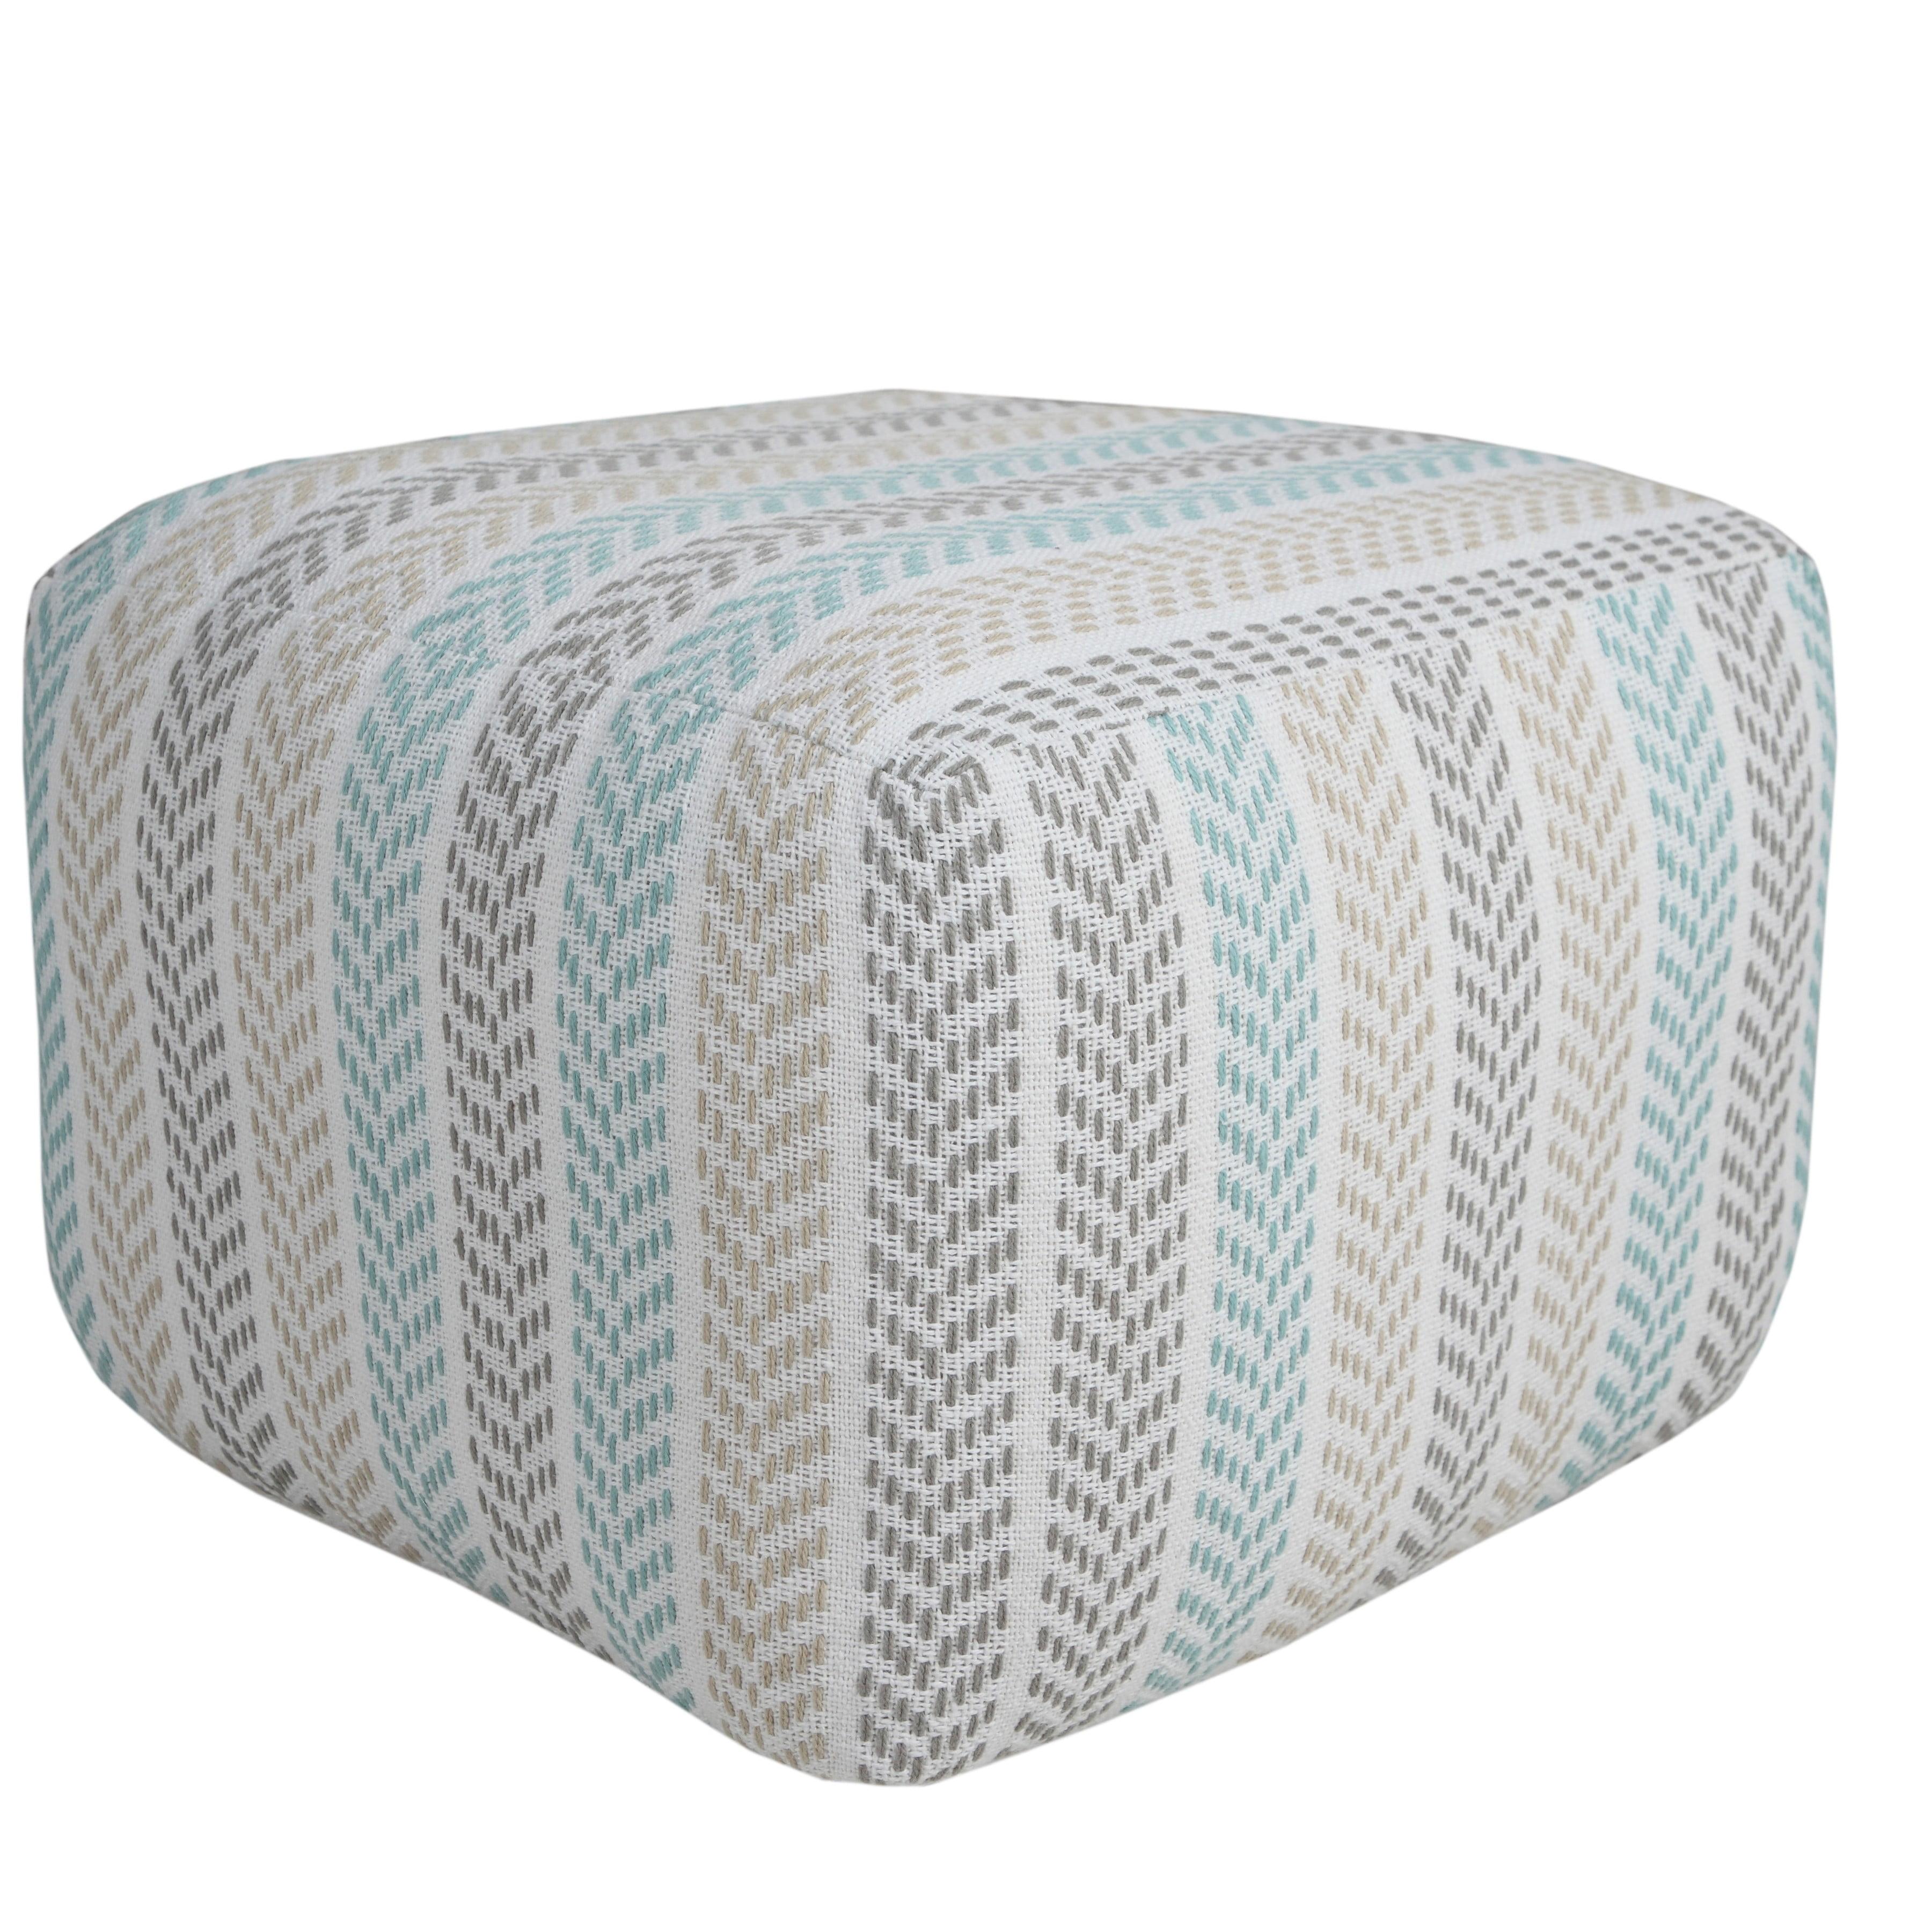 Chevron Charm Beige and Turquoise Square Pouf, 18" x 14"